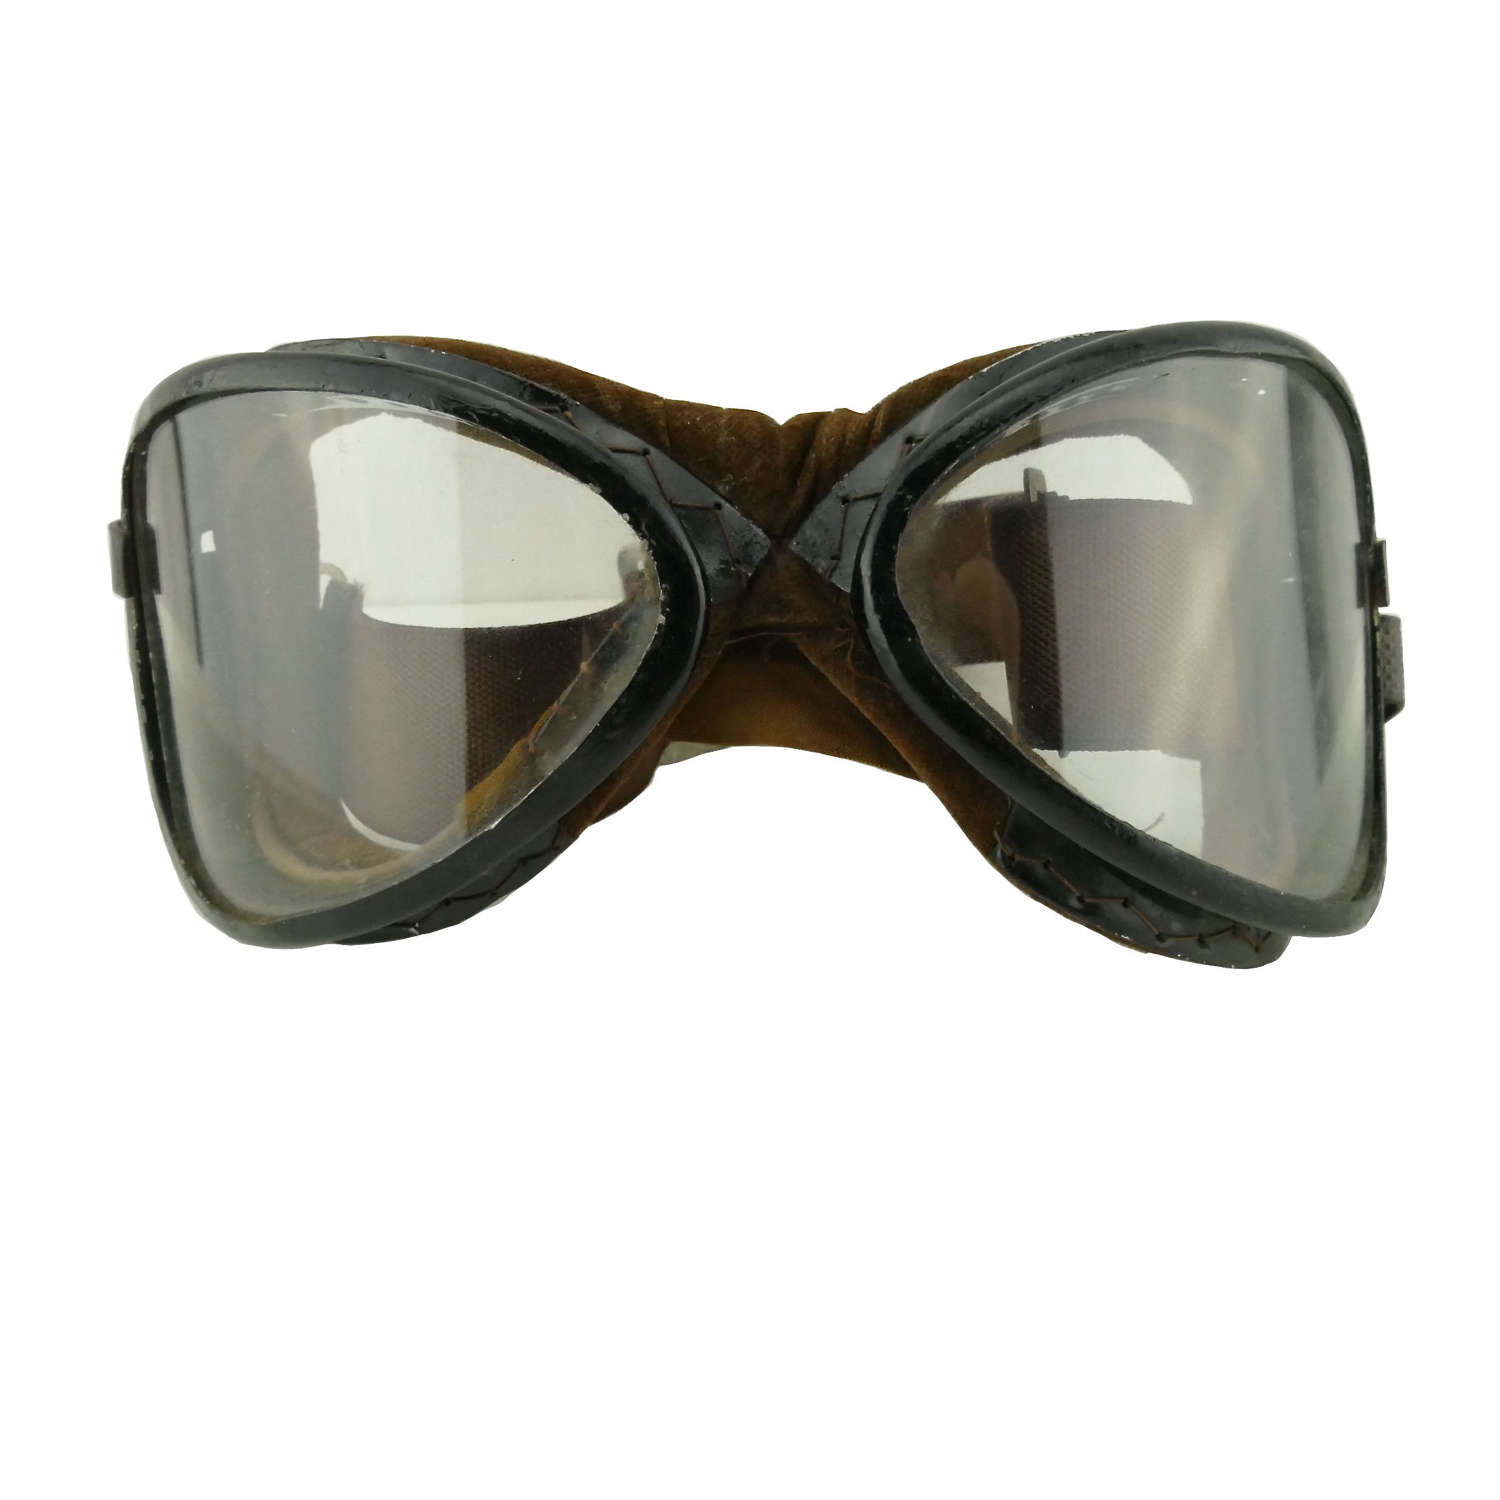 Imperial Japanese Army/Navy goggles